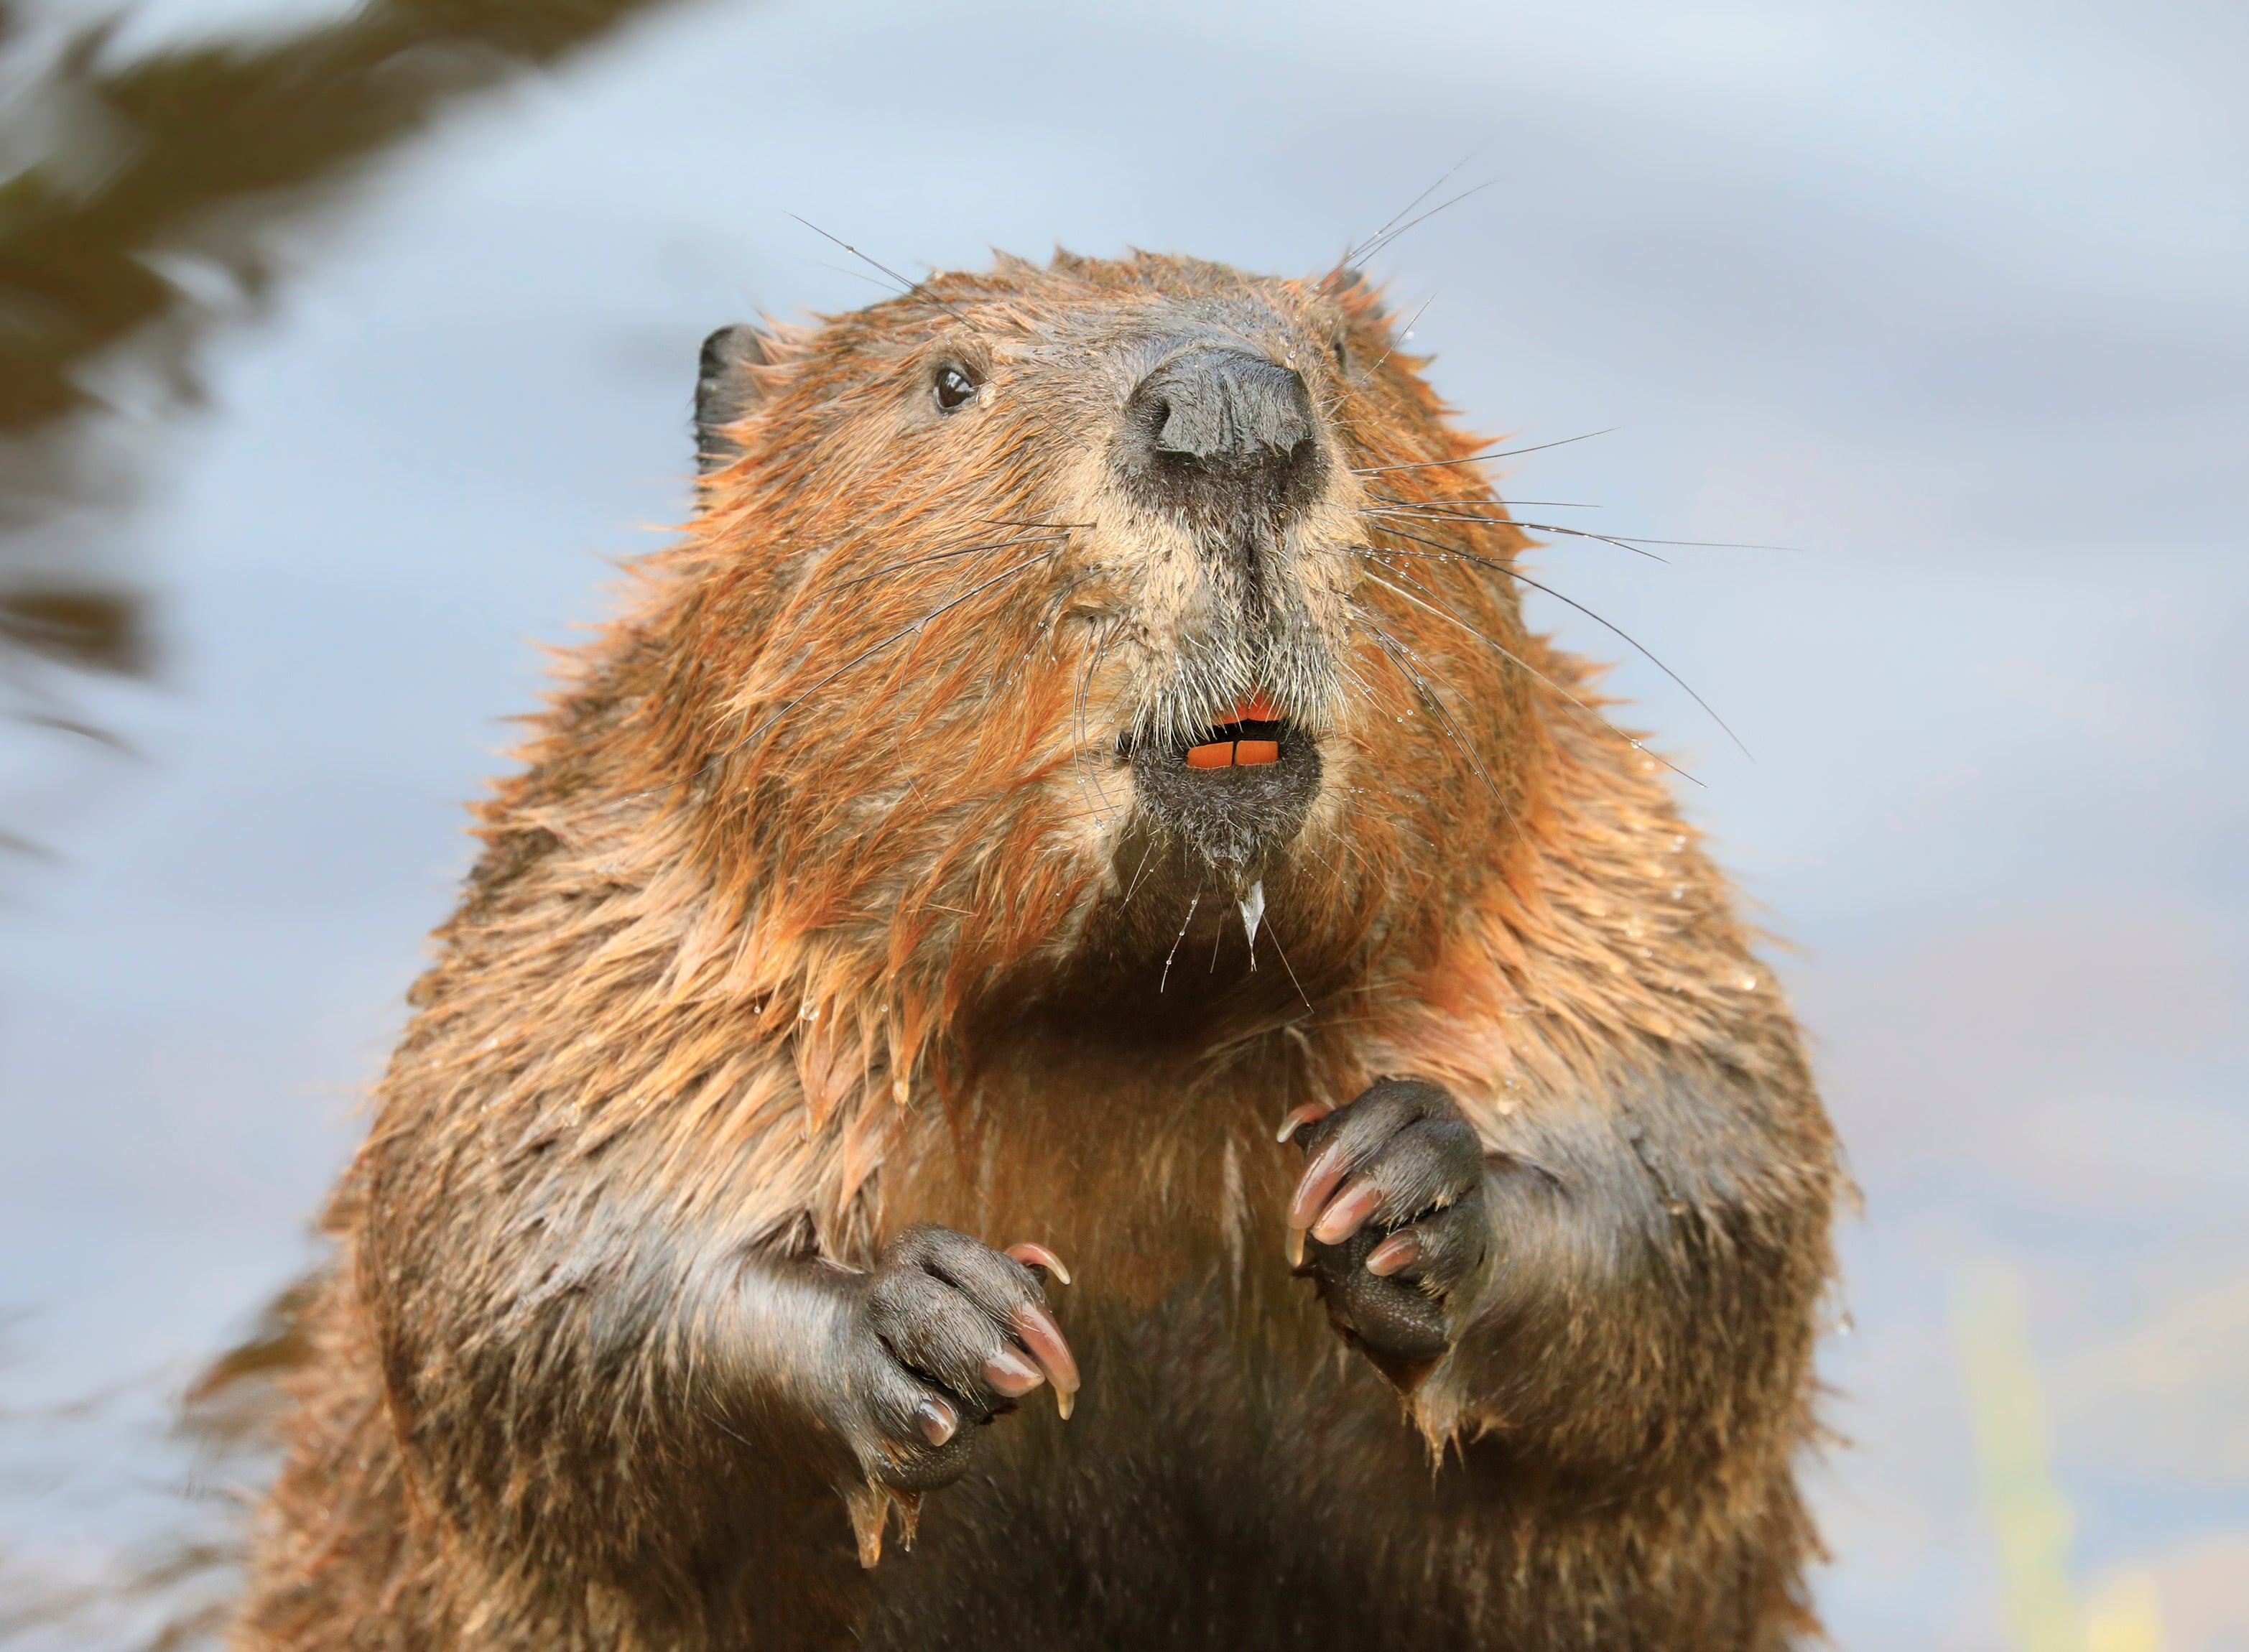 From 1 October, the Eurasian beaver has been given protected native species status